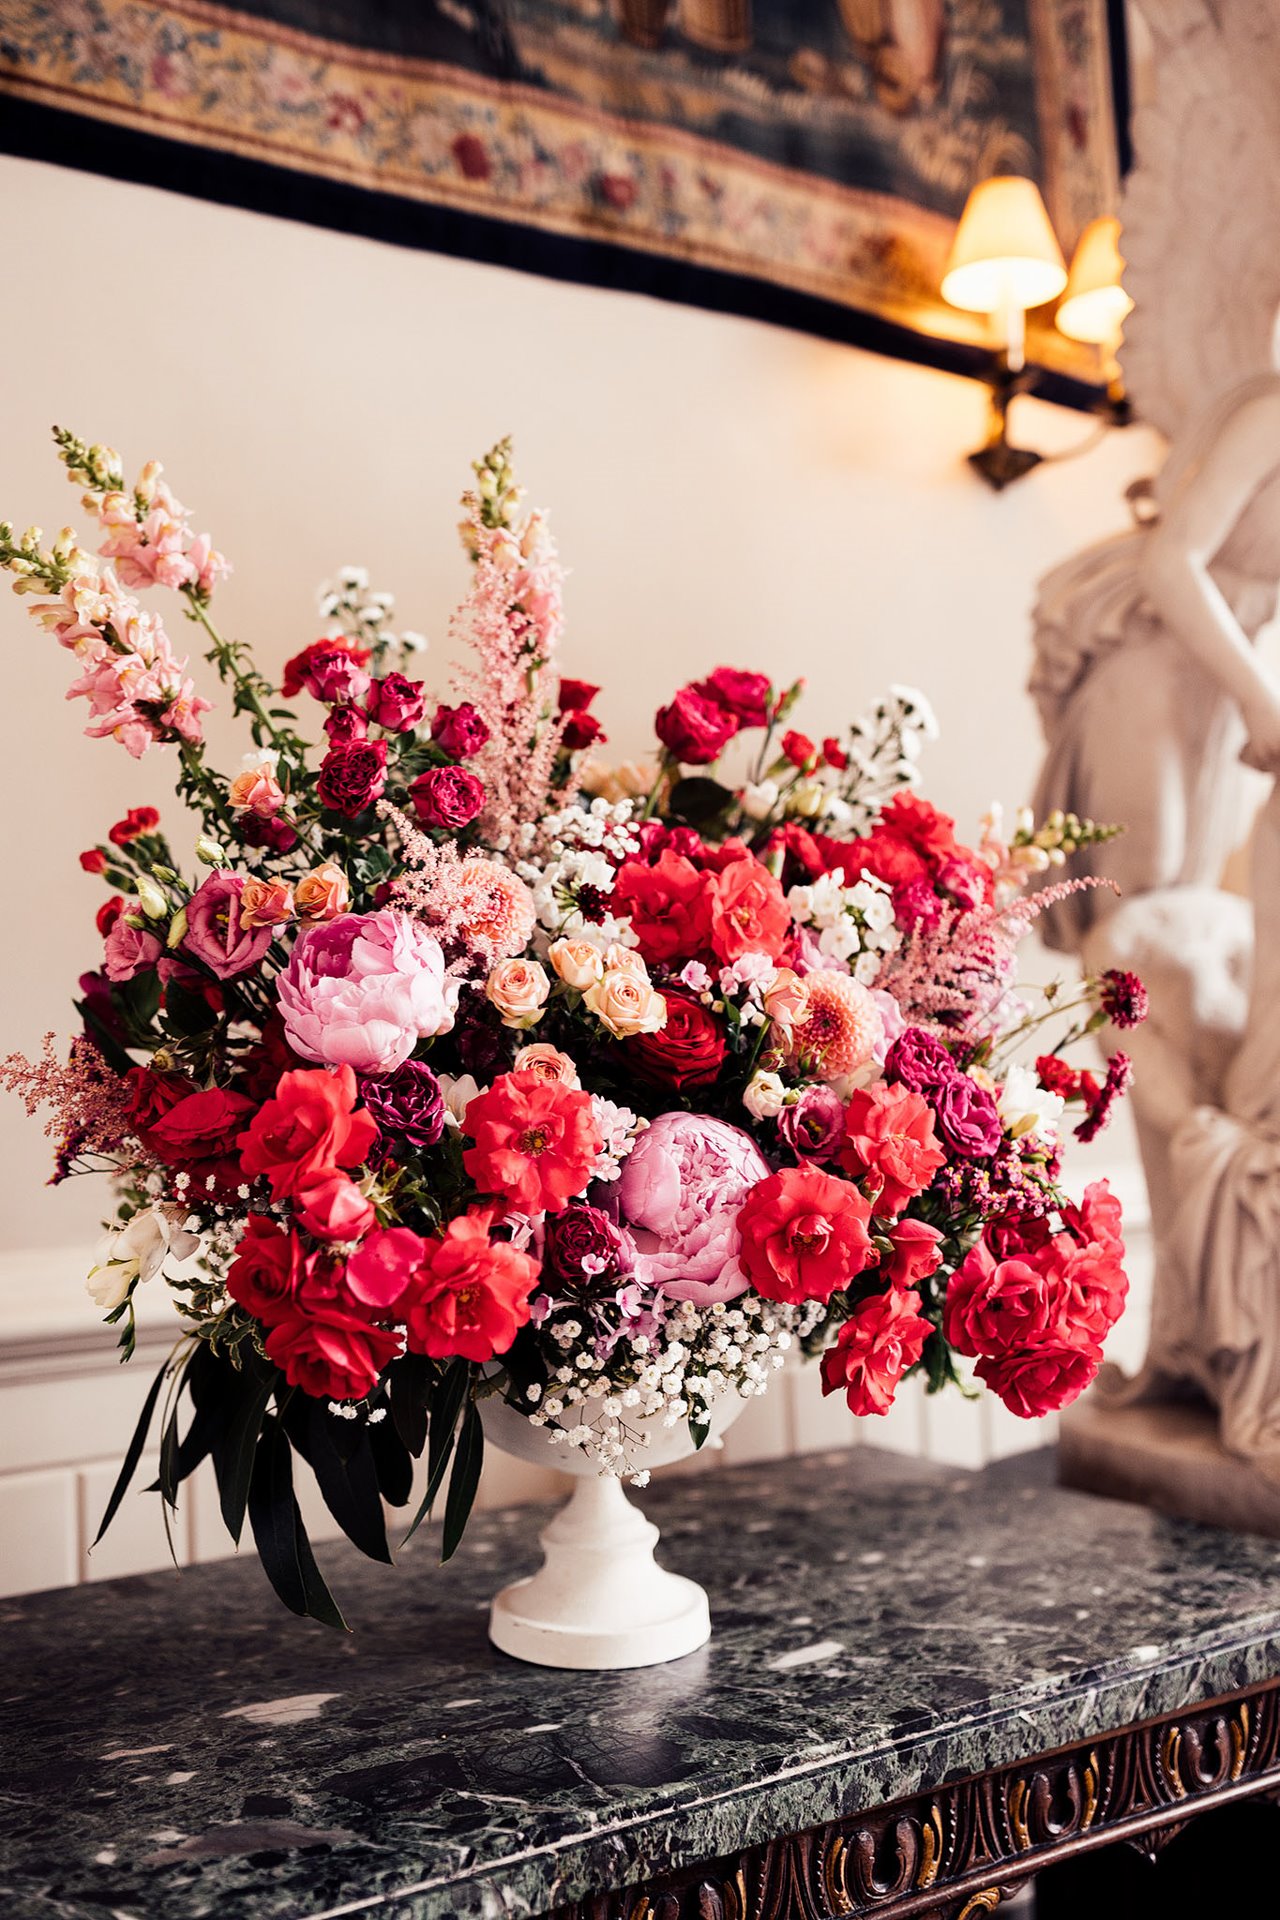 Huge display of Pink and red wedding flowers with peonies, roses and fox gloves by wild wedding florist jenny fleur at Cotswolds wedding venue elmore court